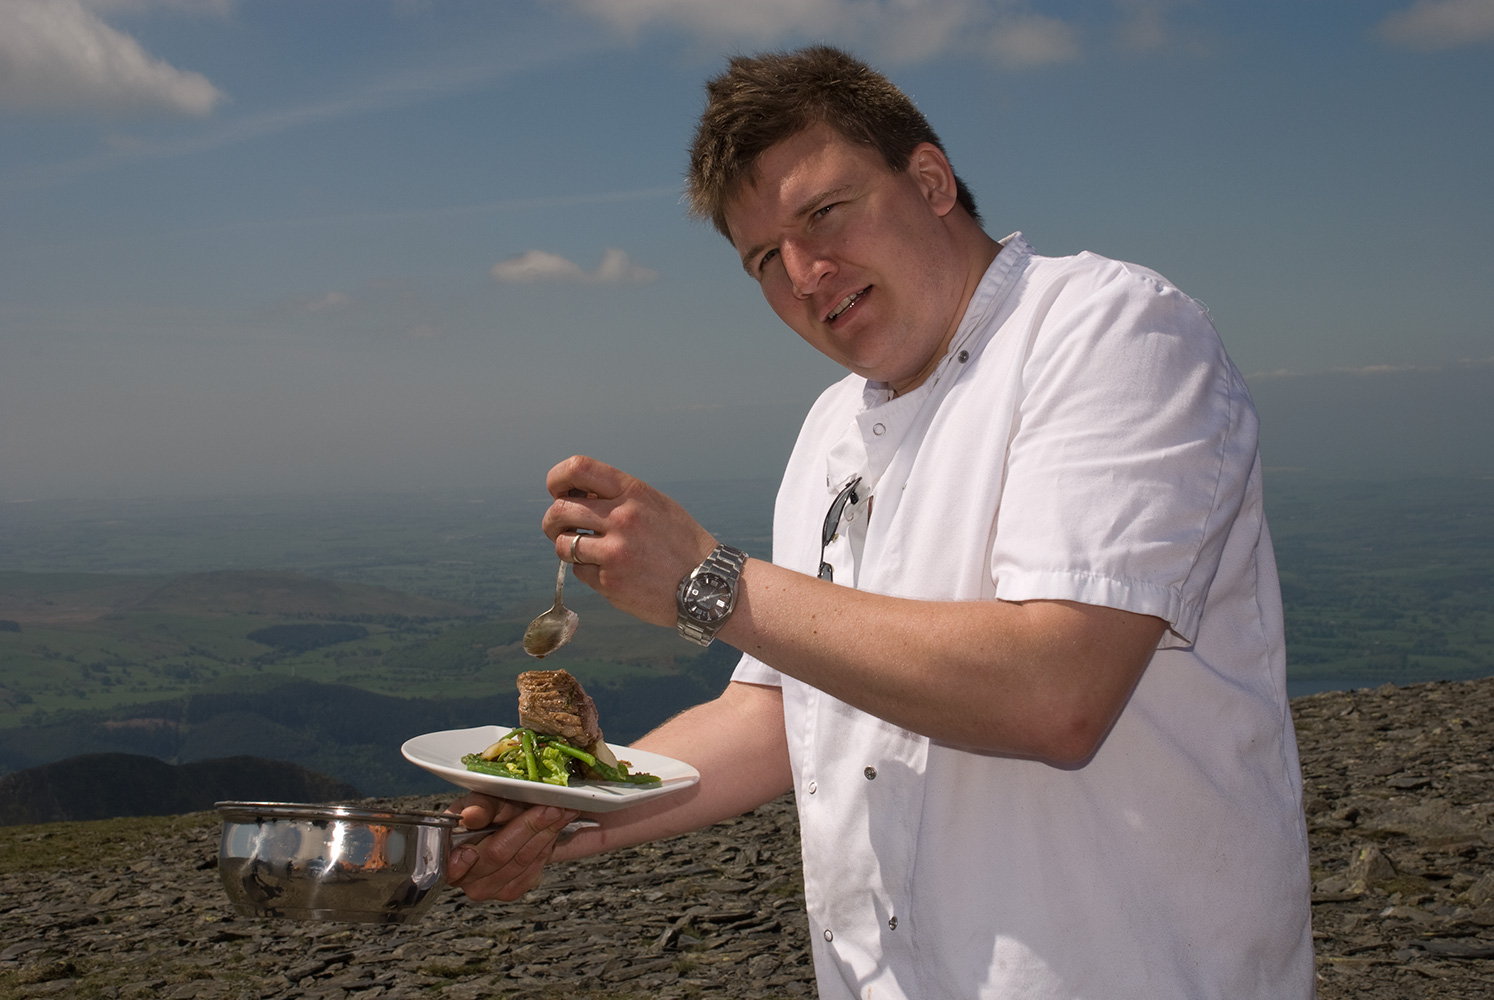 As part of the opening celebrations for Keswick Mountain Festival in 2008, celebrity chef Peter Sidwell of Simply Good Taste served a five course dinner on the summit of Skiddaw. Fortunately the weather was kind!